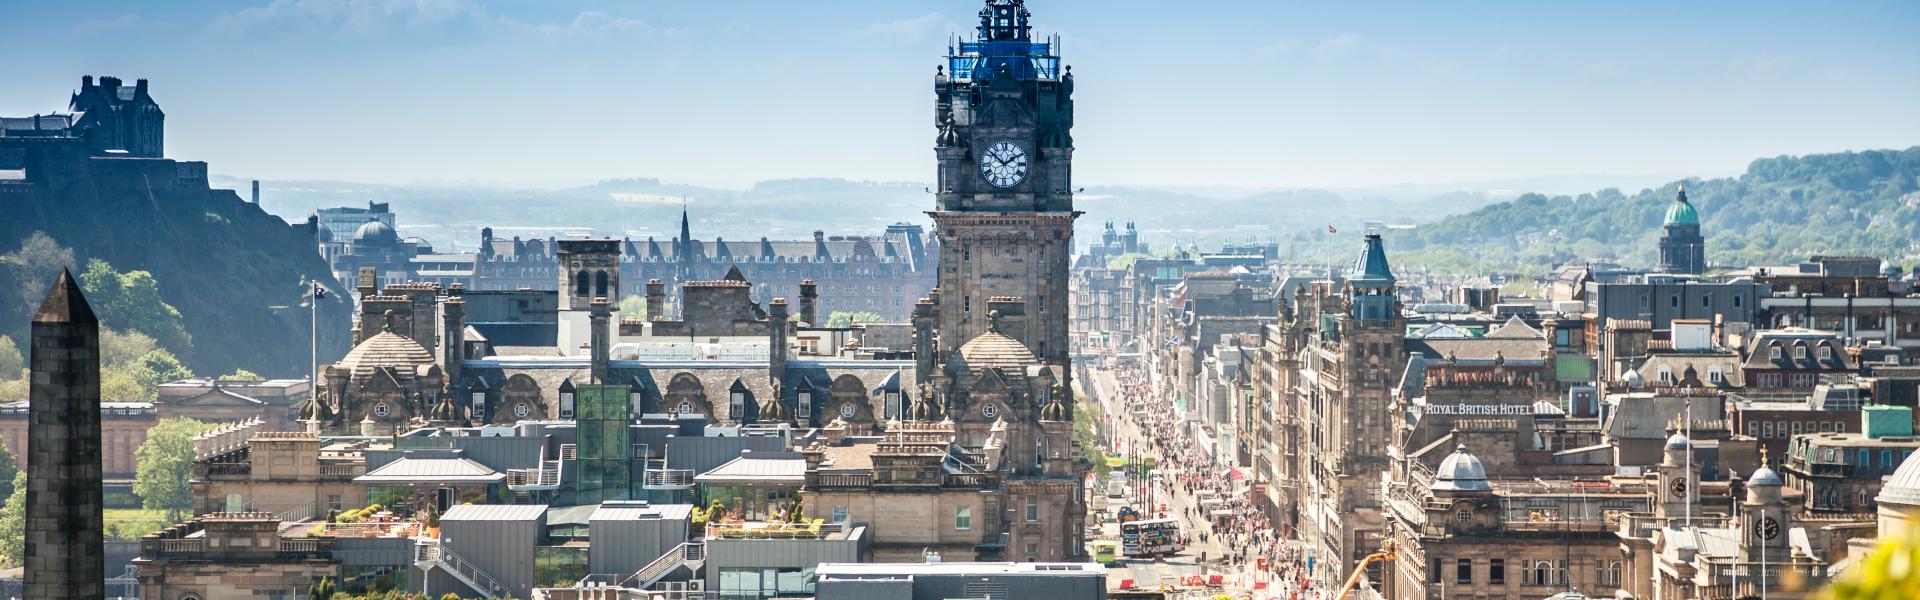 Holiday Cottages & Apartments in Edinburgh from £38 | HomeToGo